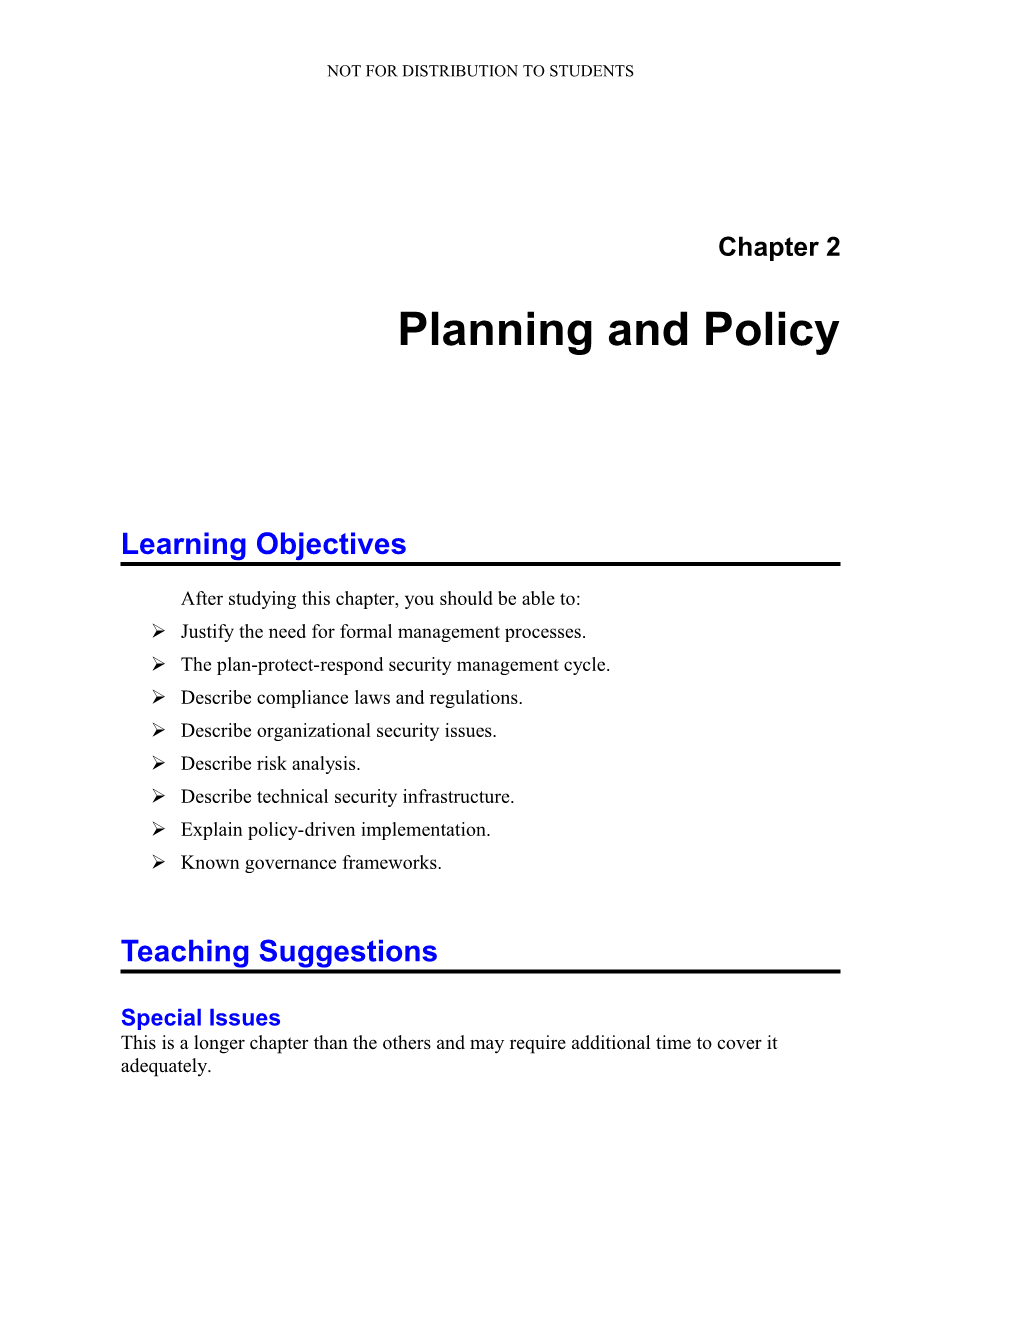 Planning and Policy